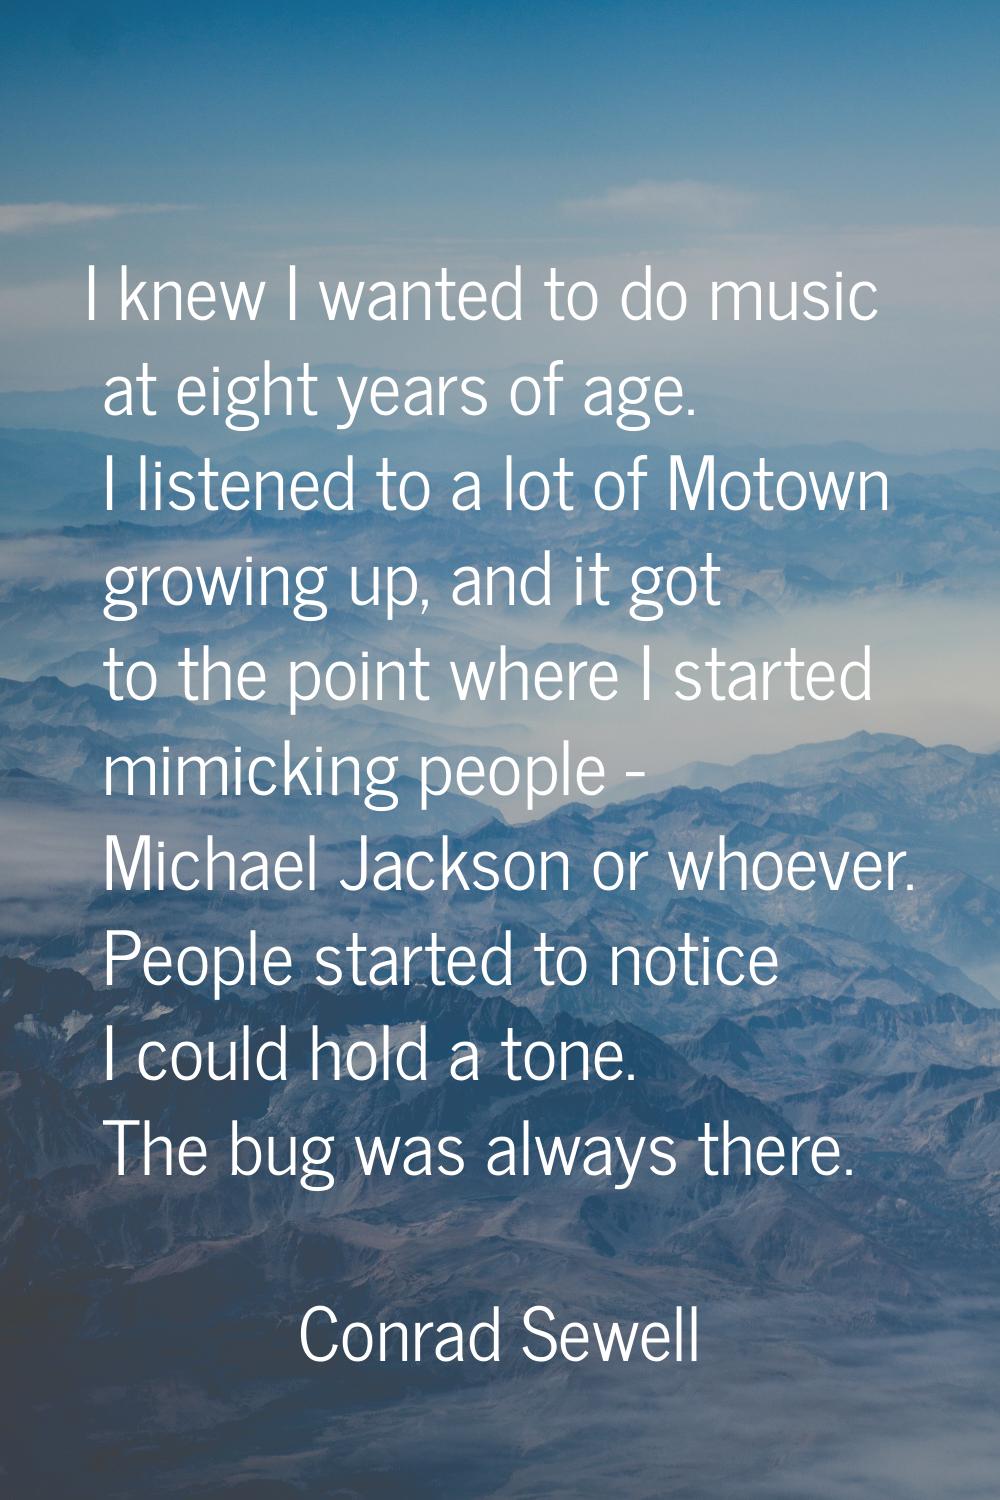 I knew I wanted to do music at eight years of age. I listened to a lot of Motown growing up, and it